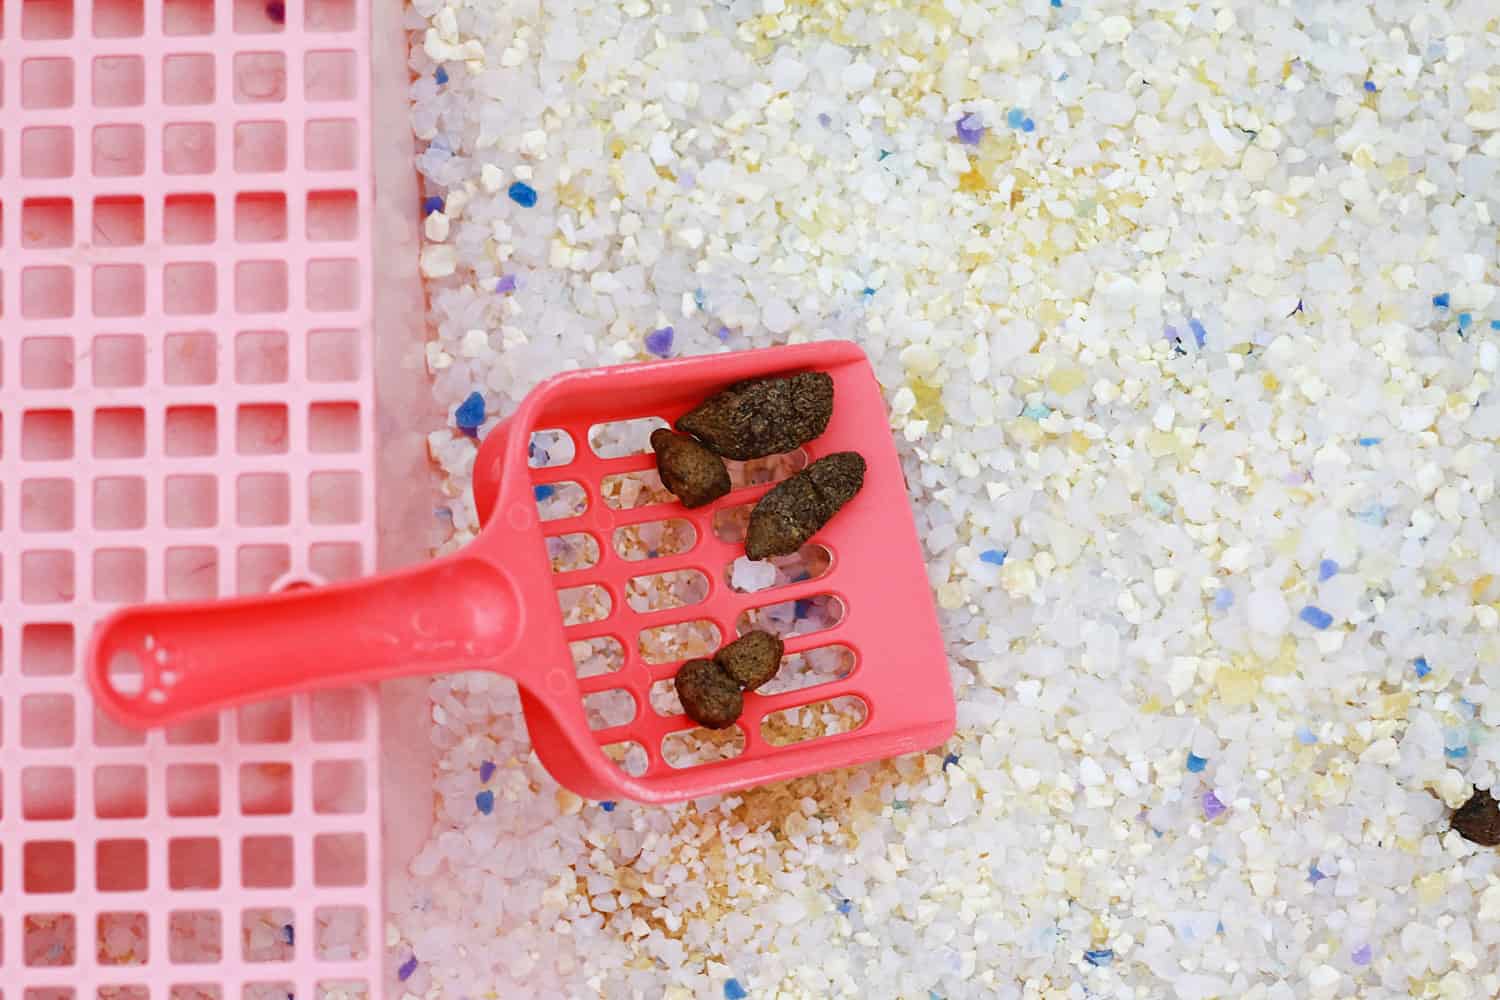 Scooping stool sample from the litter box